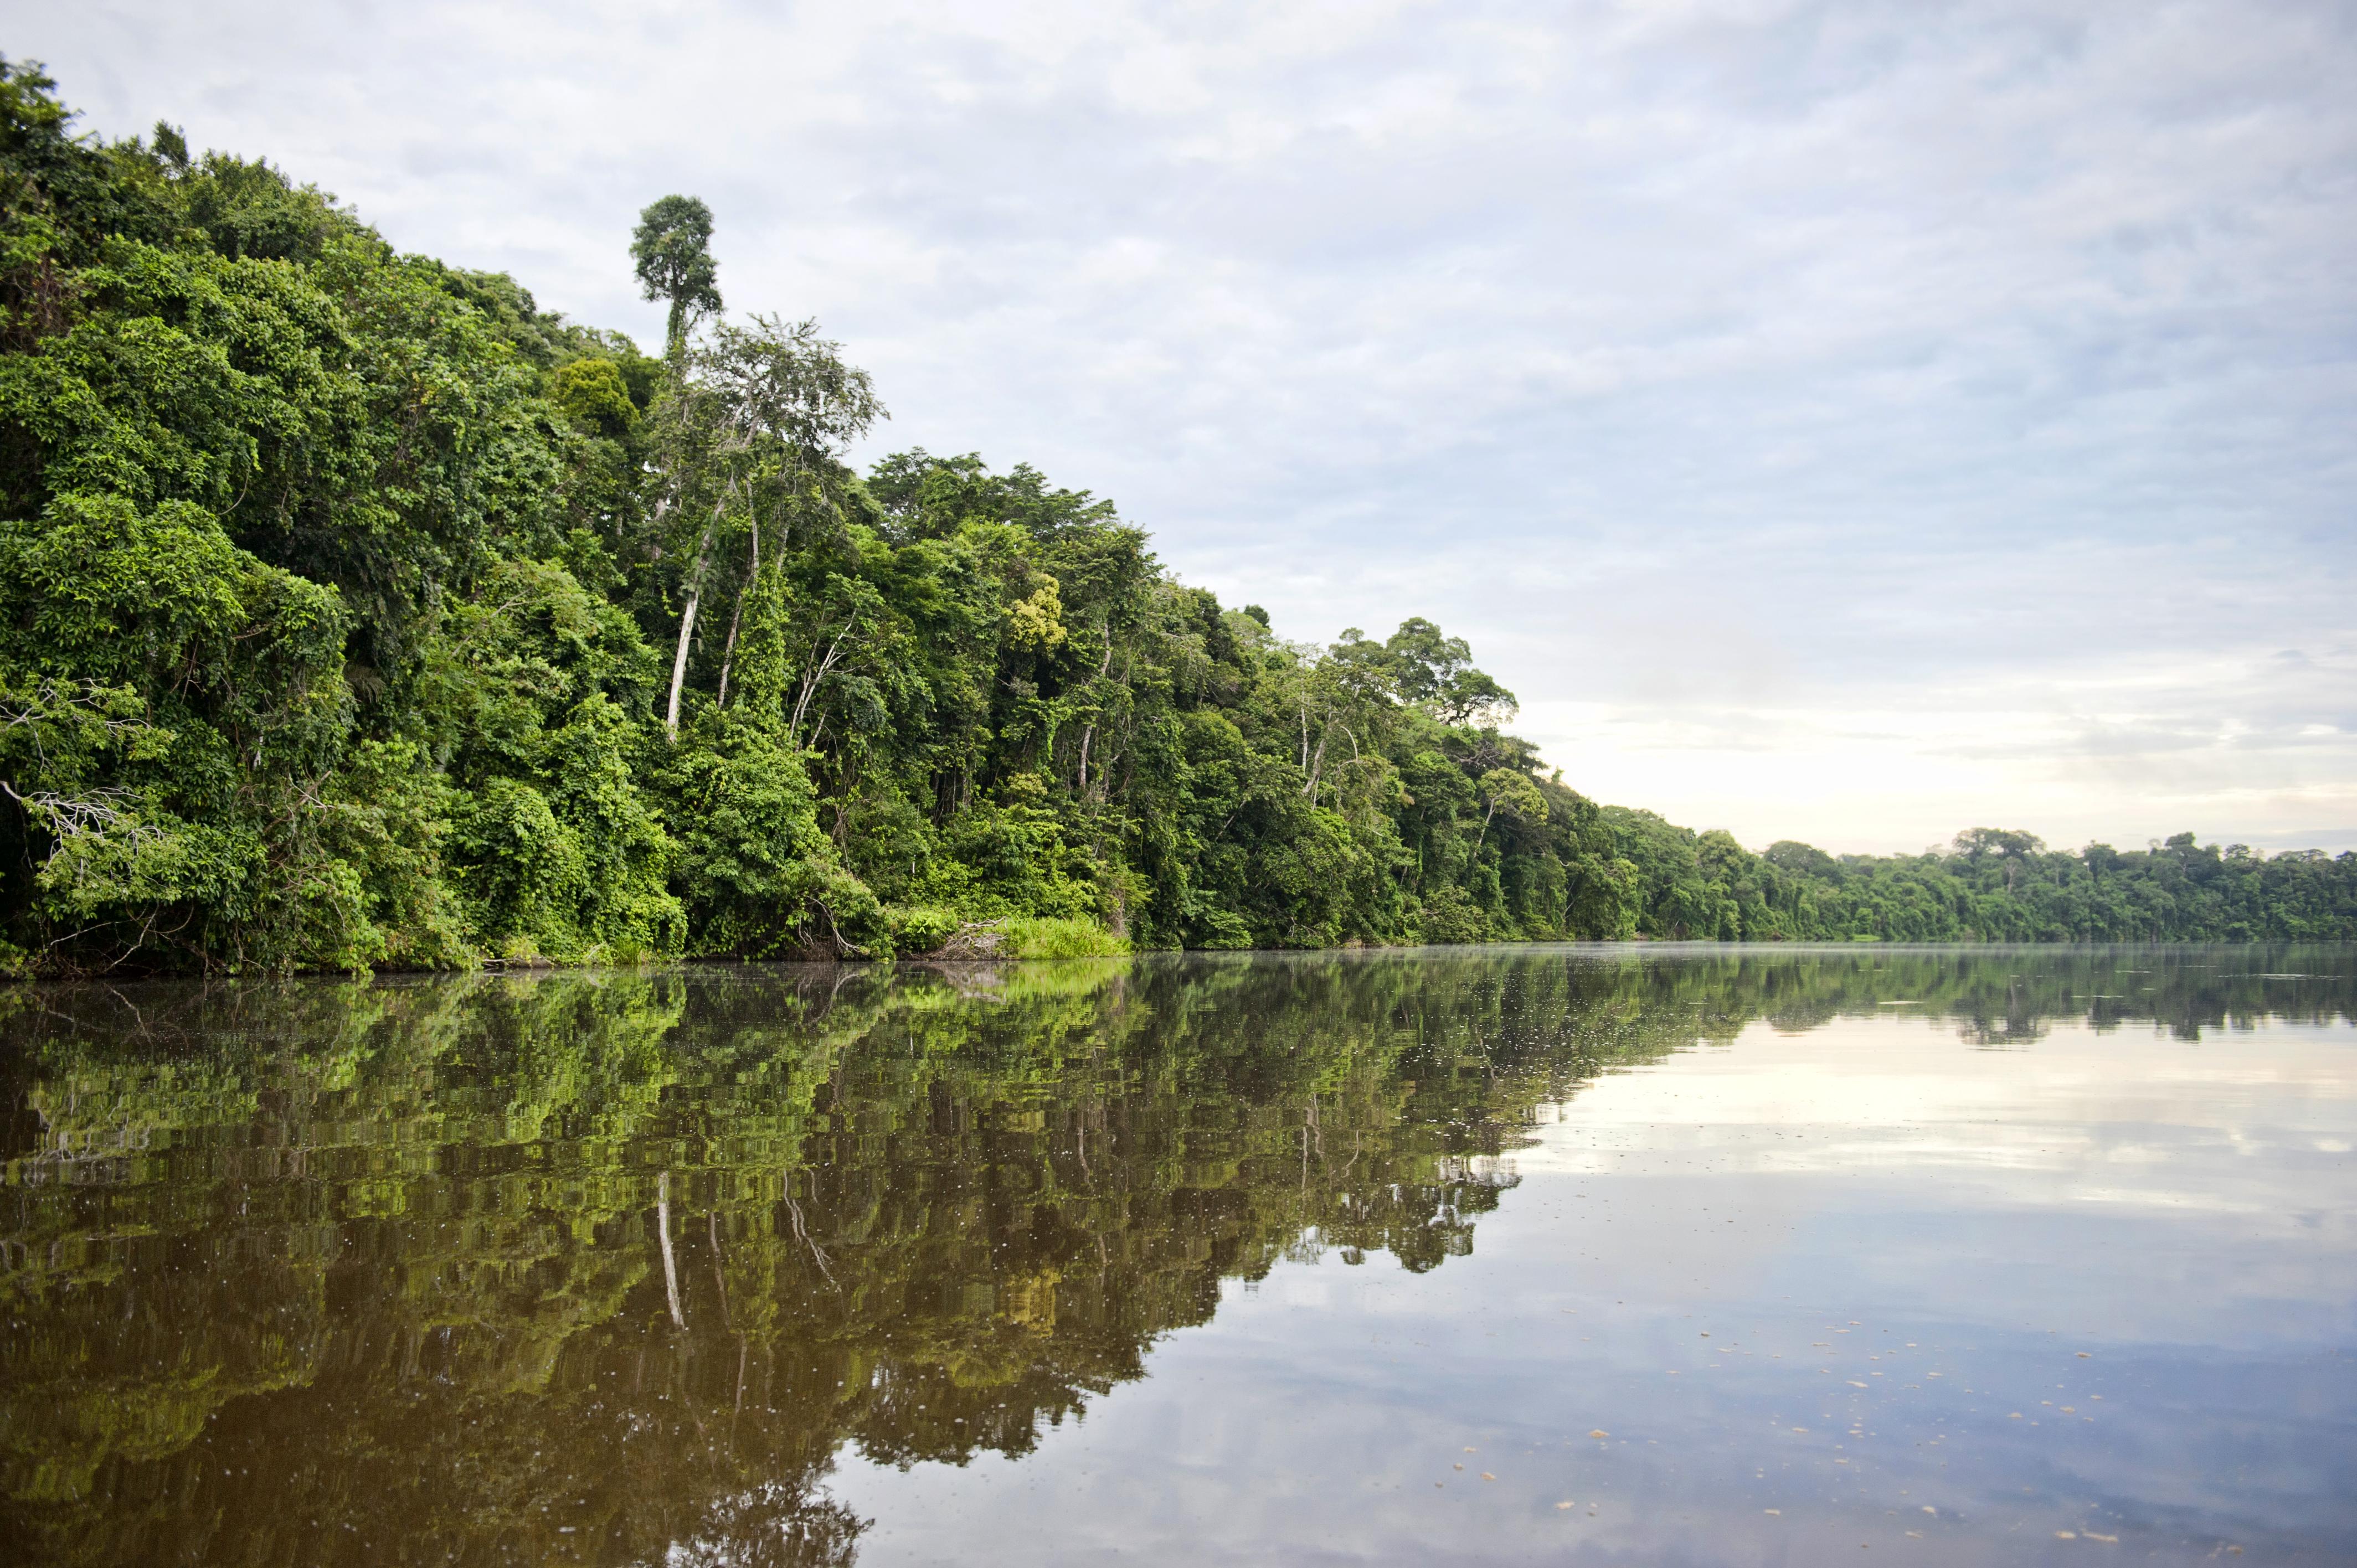 Geography Facts About the Amazon River